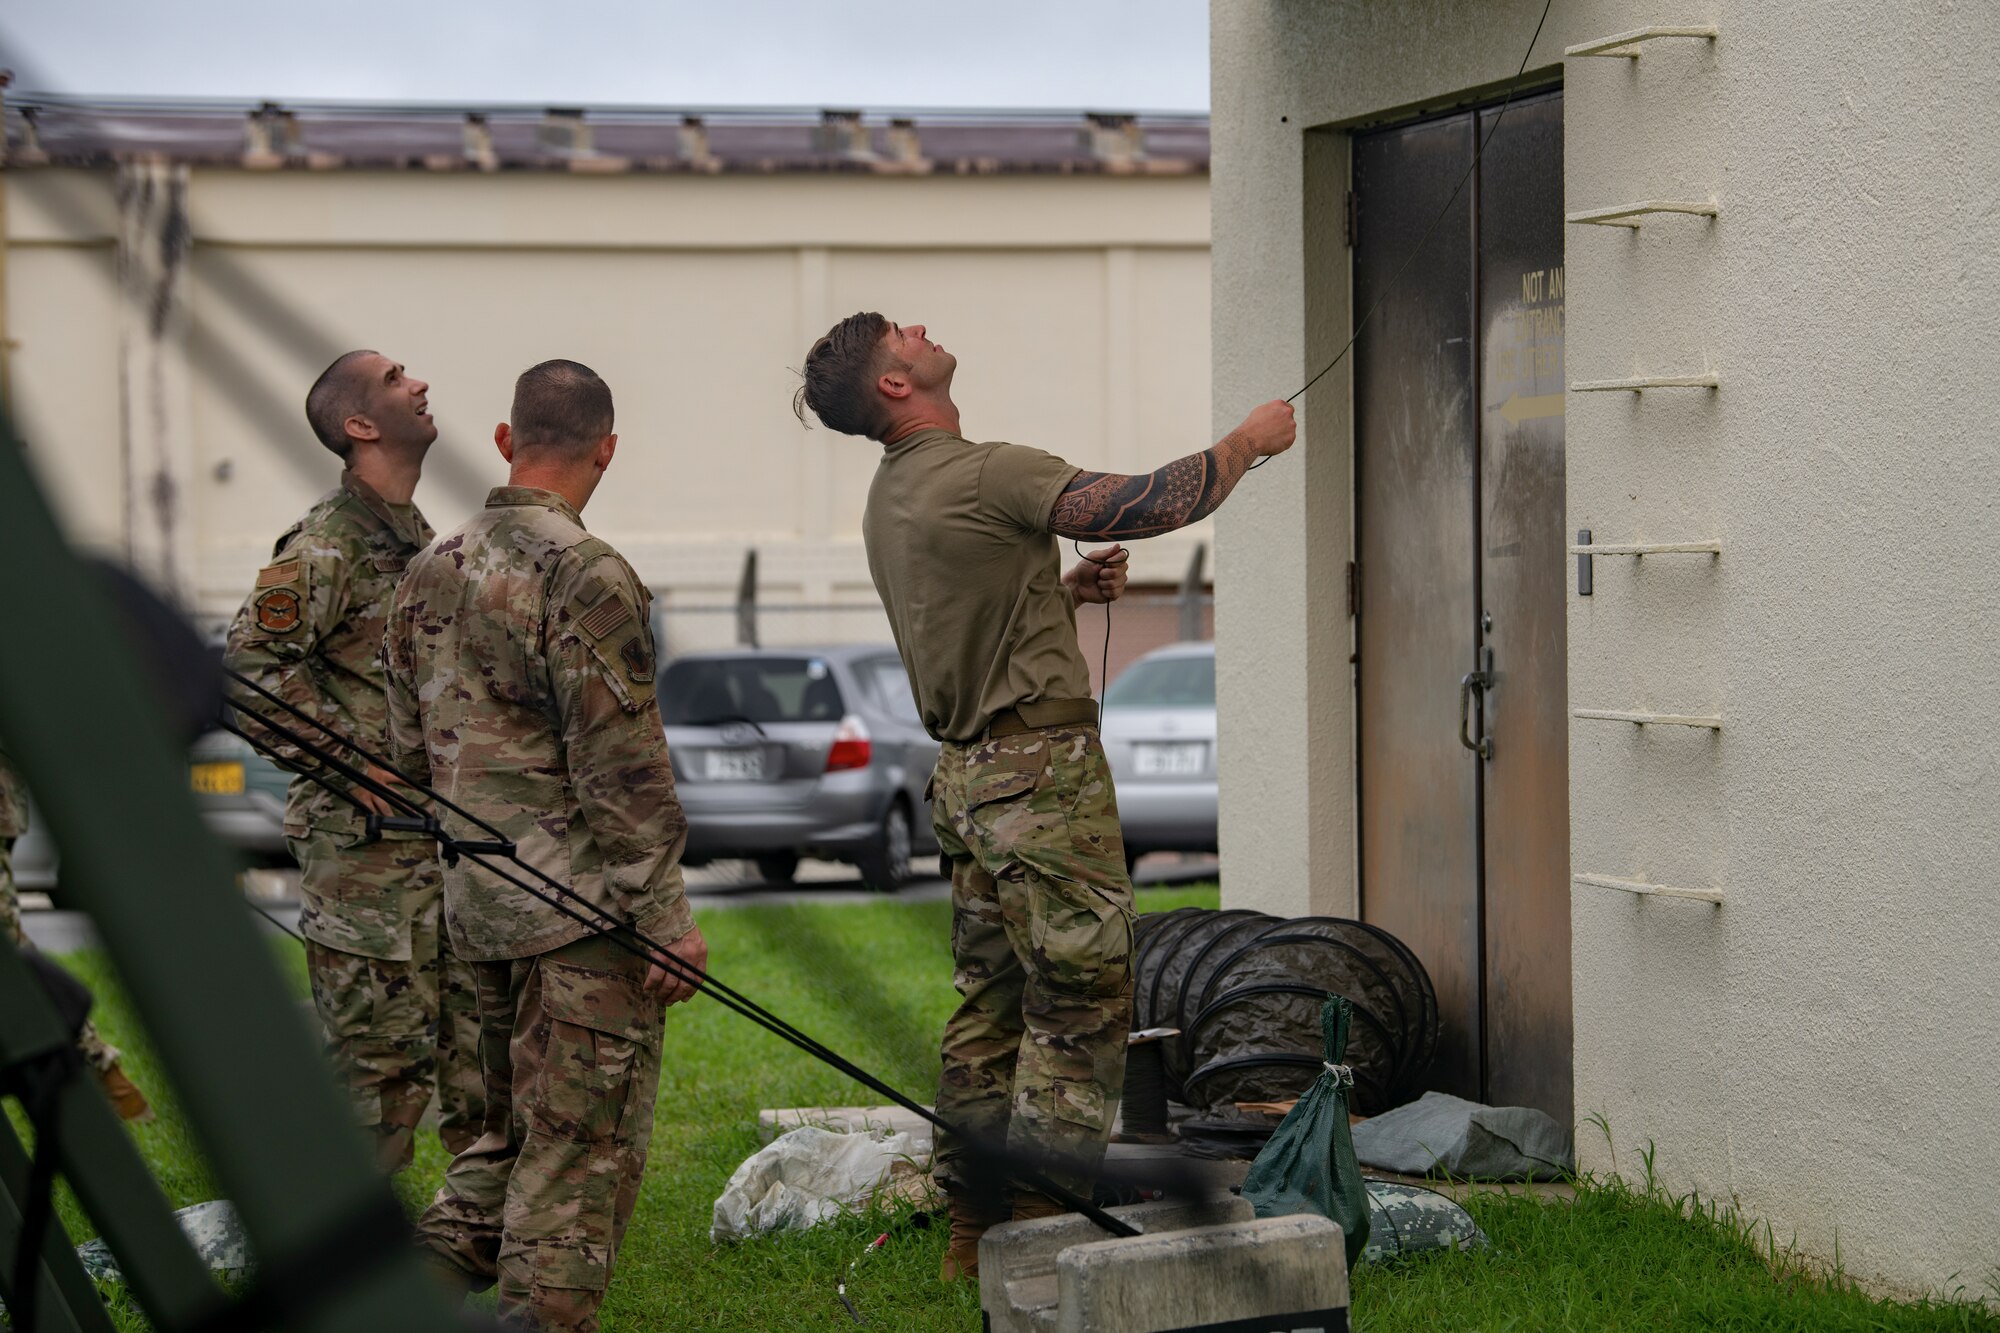 Airmen assist in setting up antennas for communication